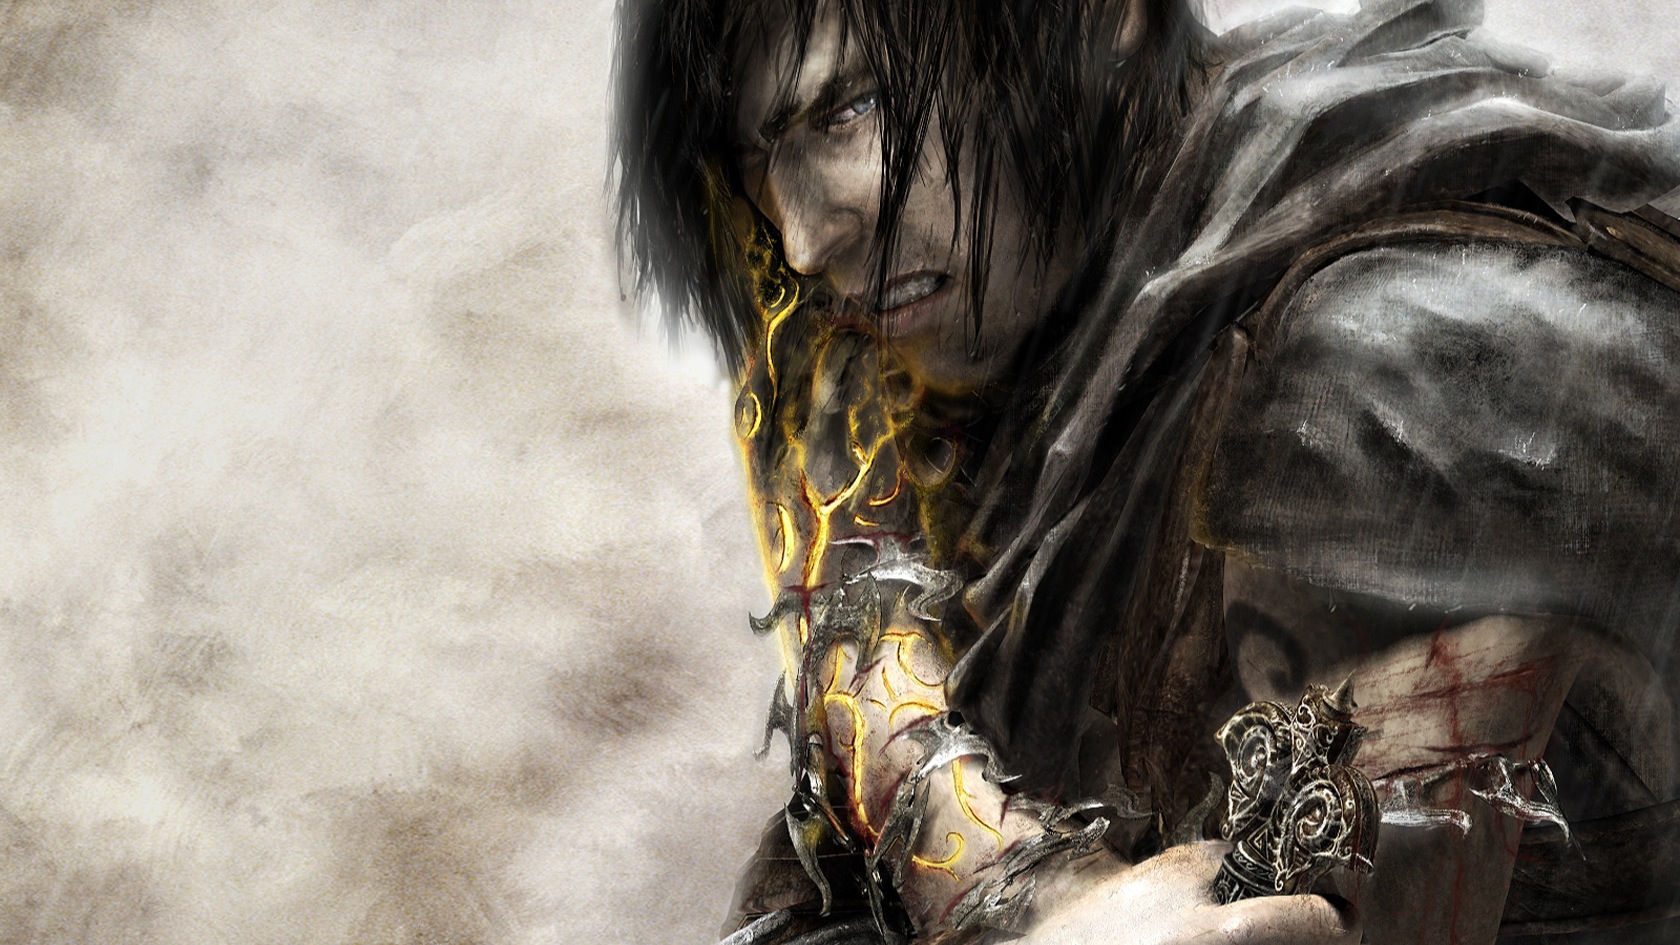 Wallpaper Prince Of Persia The Two Thrones